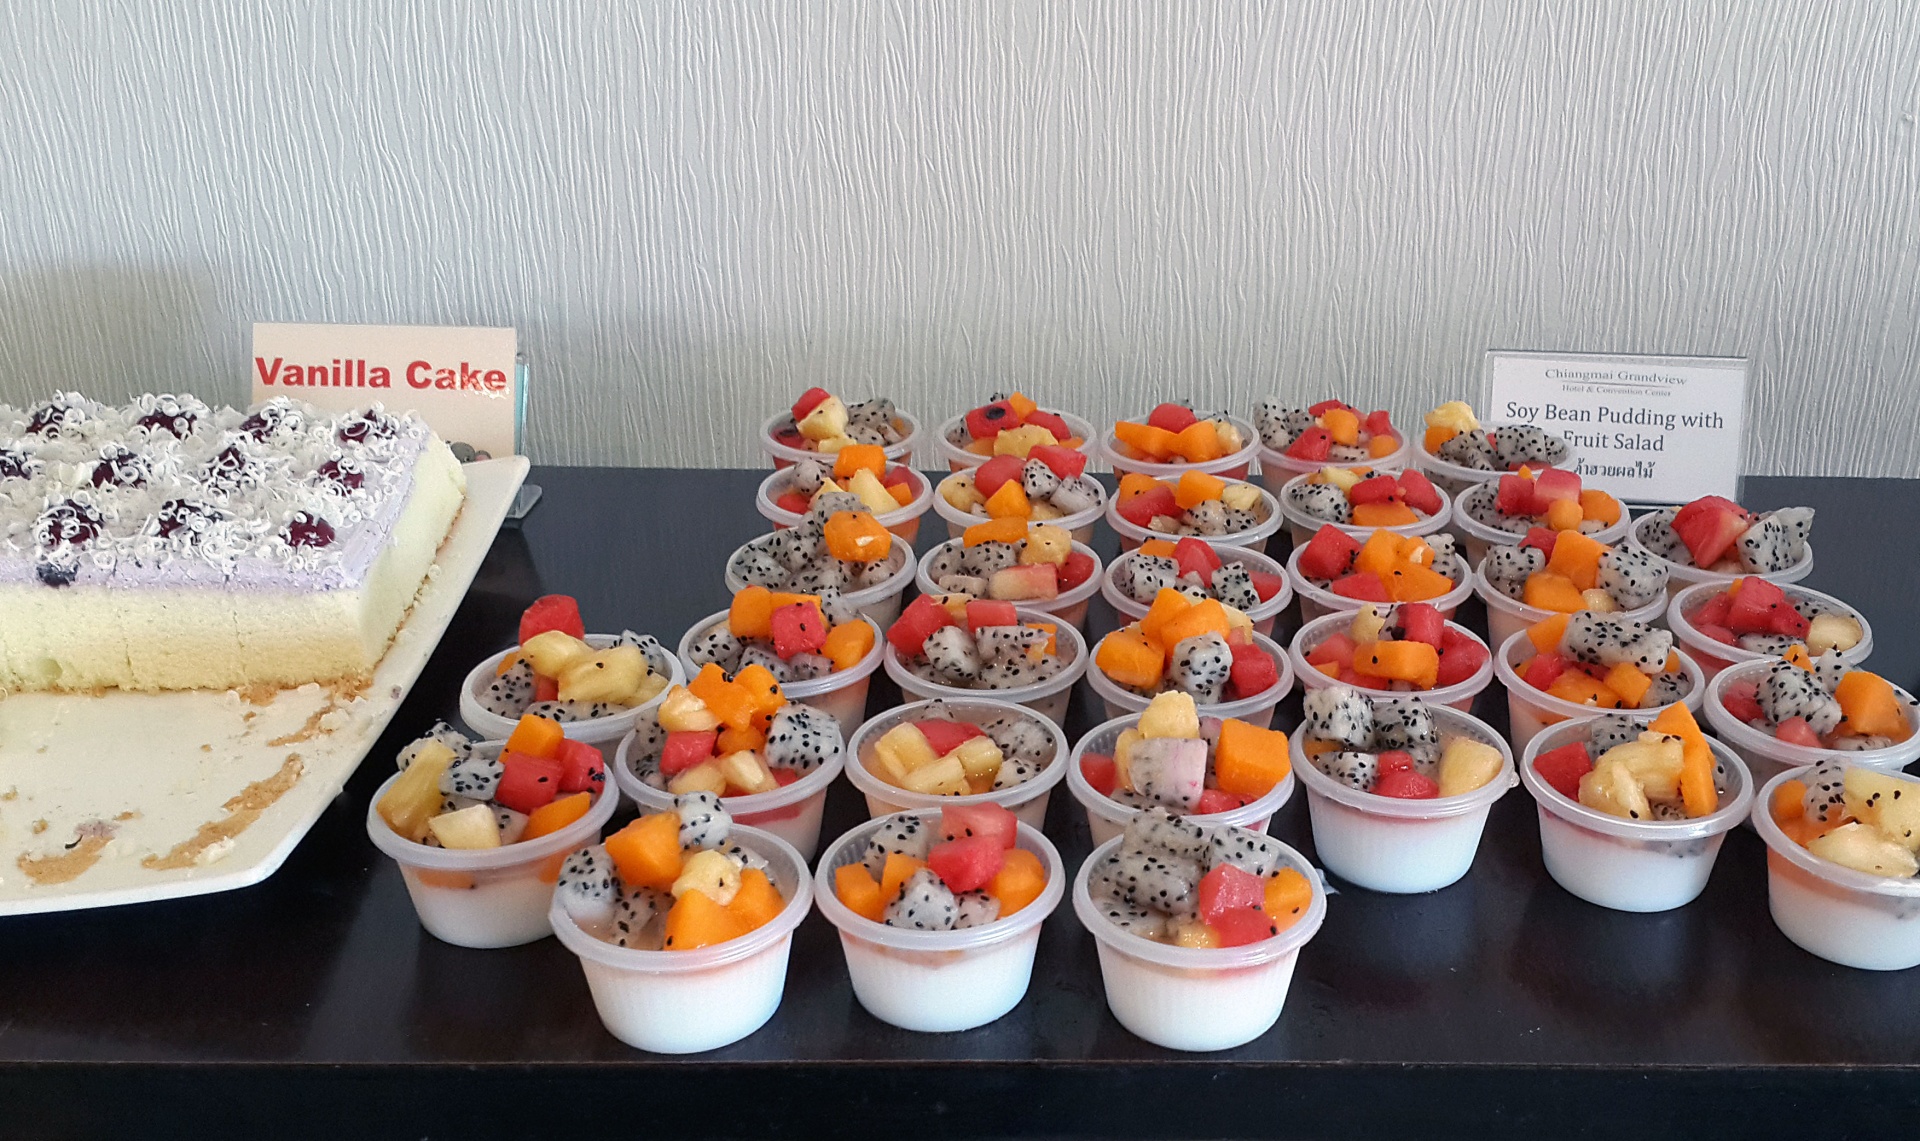 soy bean pudding fruit salad healthy sweet dish soy bean pudding and fruit salad free photo